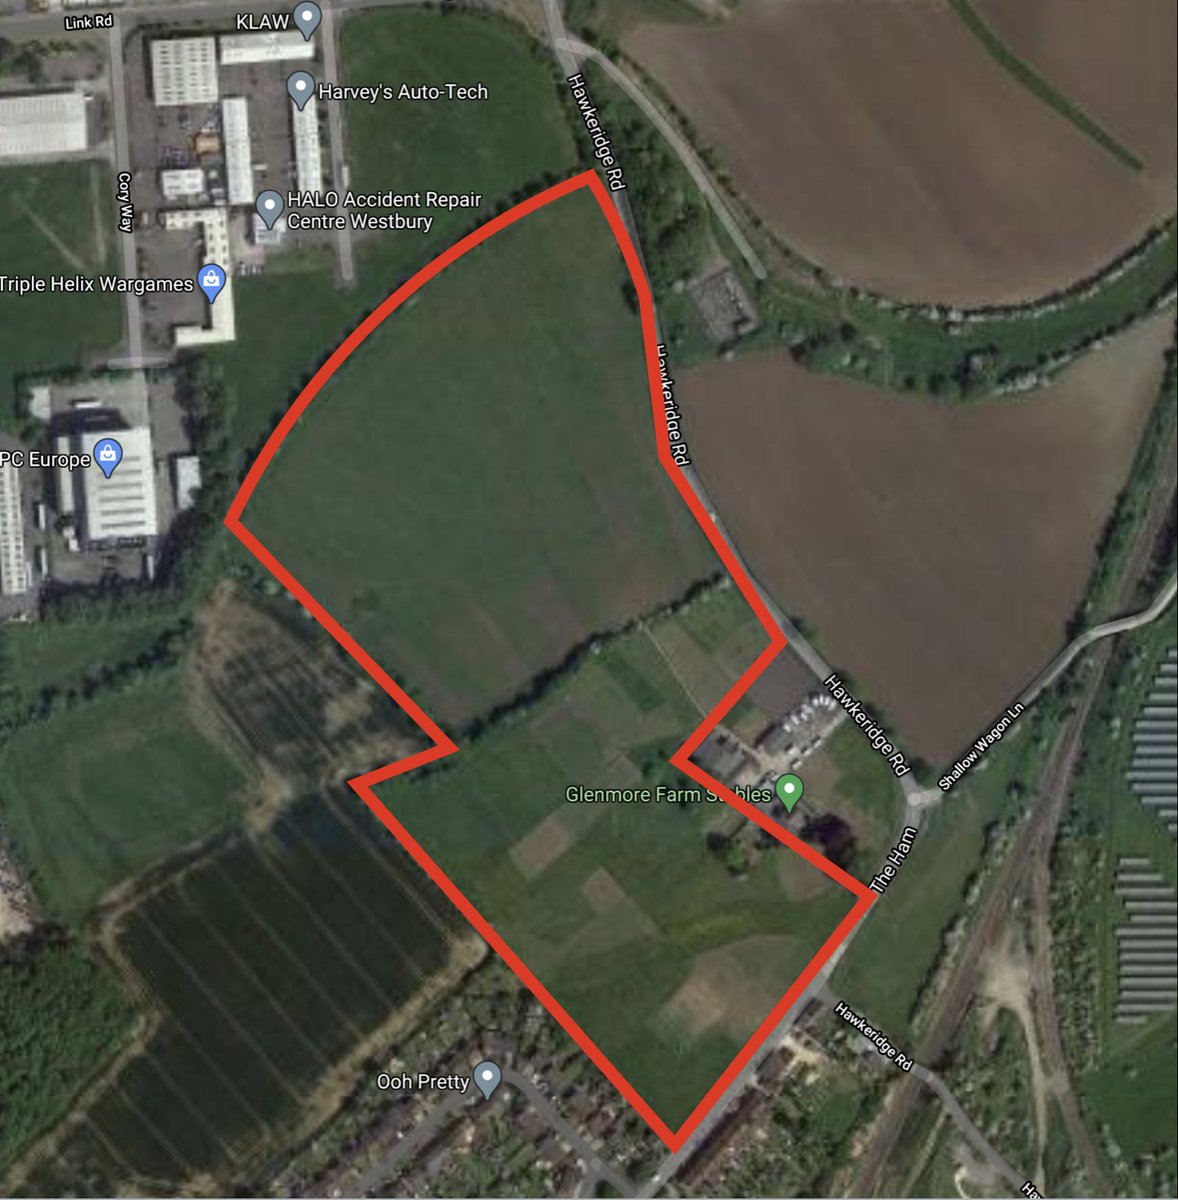 More houses for Westbury? Plans for up to 140 houses on land at Glenmore Farm, The Ham, have been revealed. What do you think? Comment below. Full story here: bit.ly/3pIMzEA